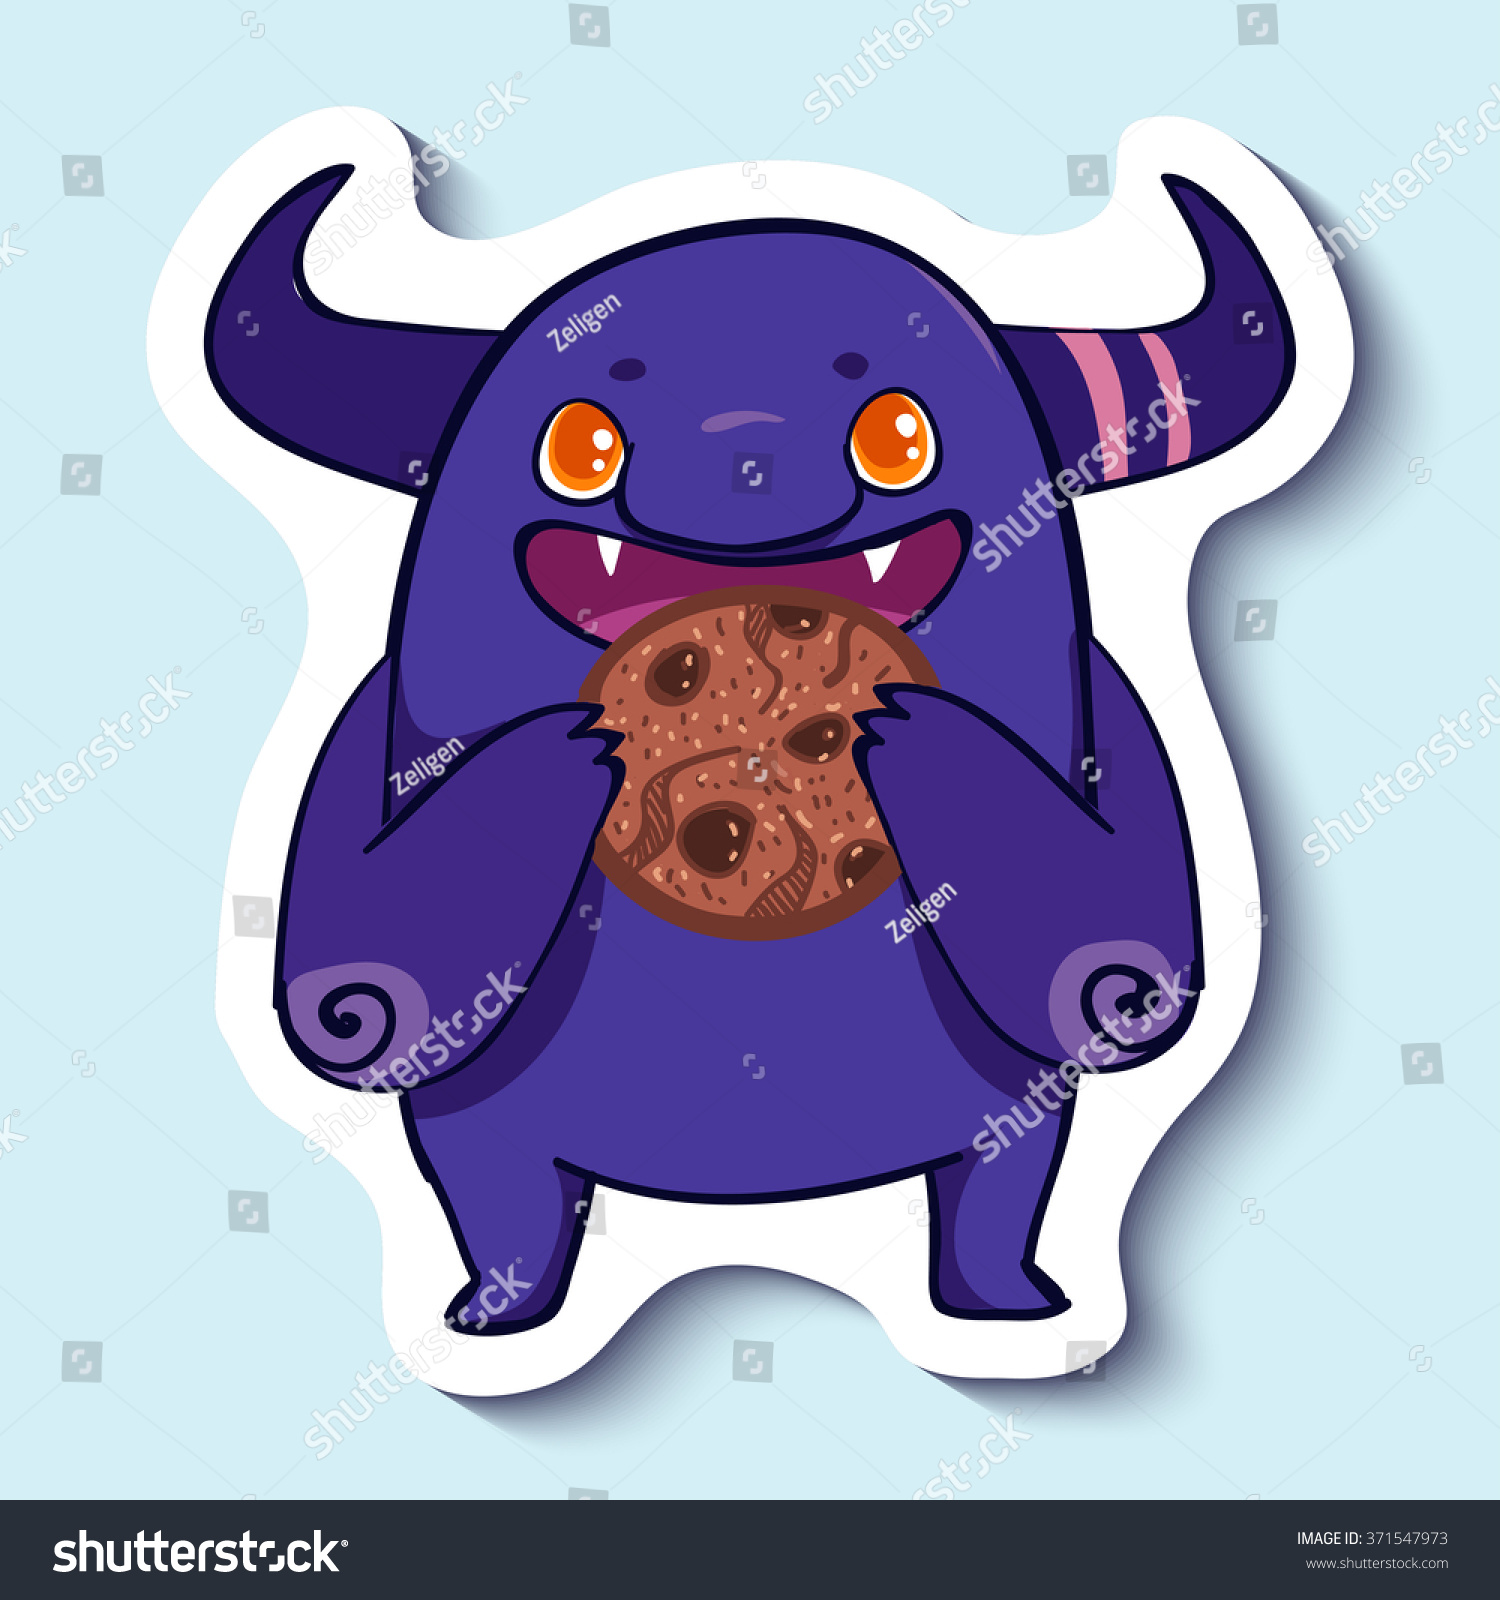 SVG of Vector emotion sticker with cute eating monster on blue background. Monster eats a big yammy cookie. Breakfast. Have a meal. svg